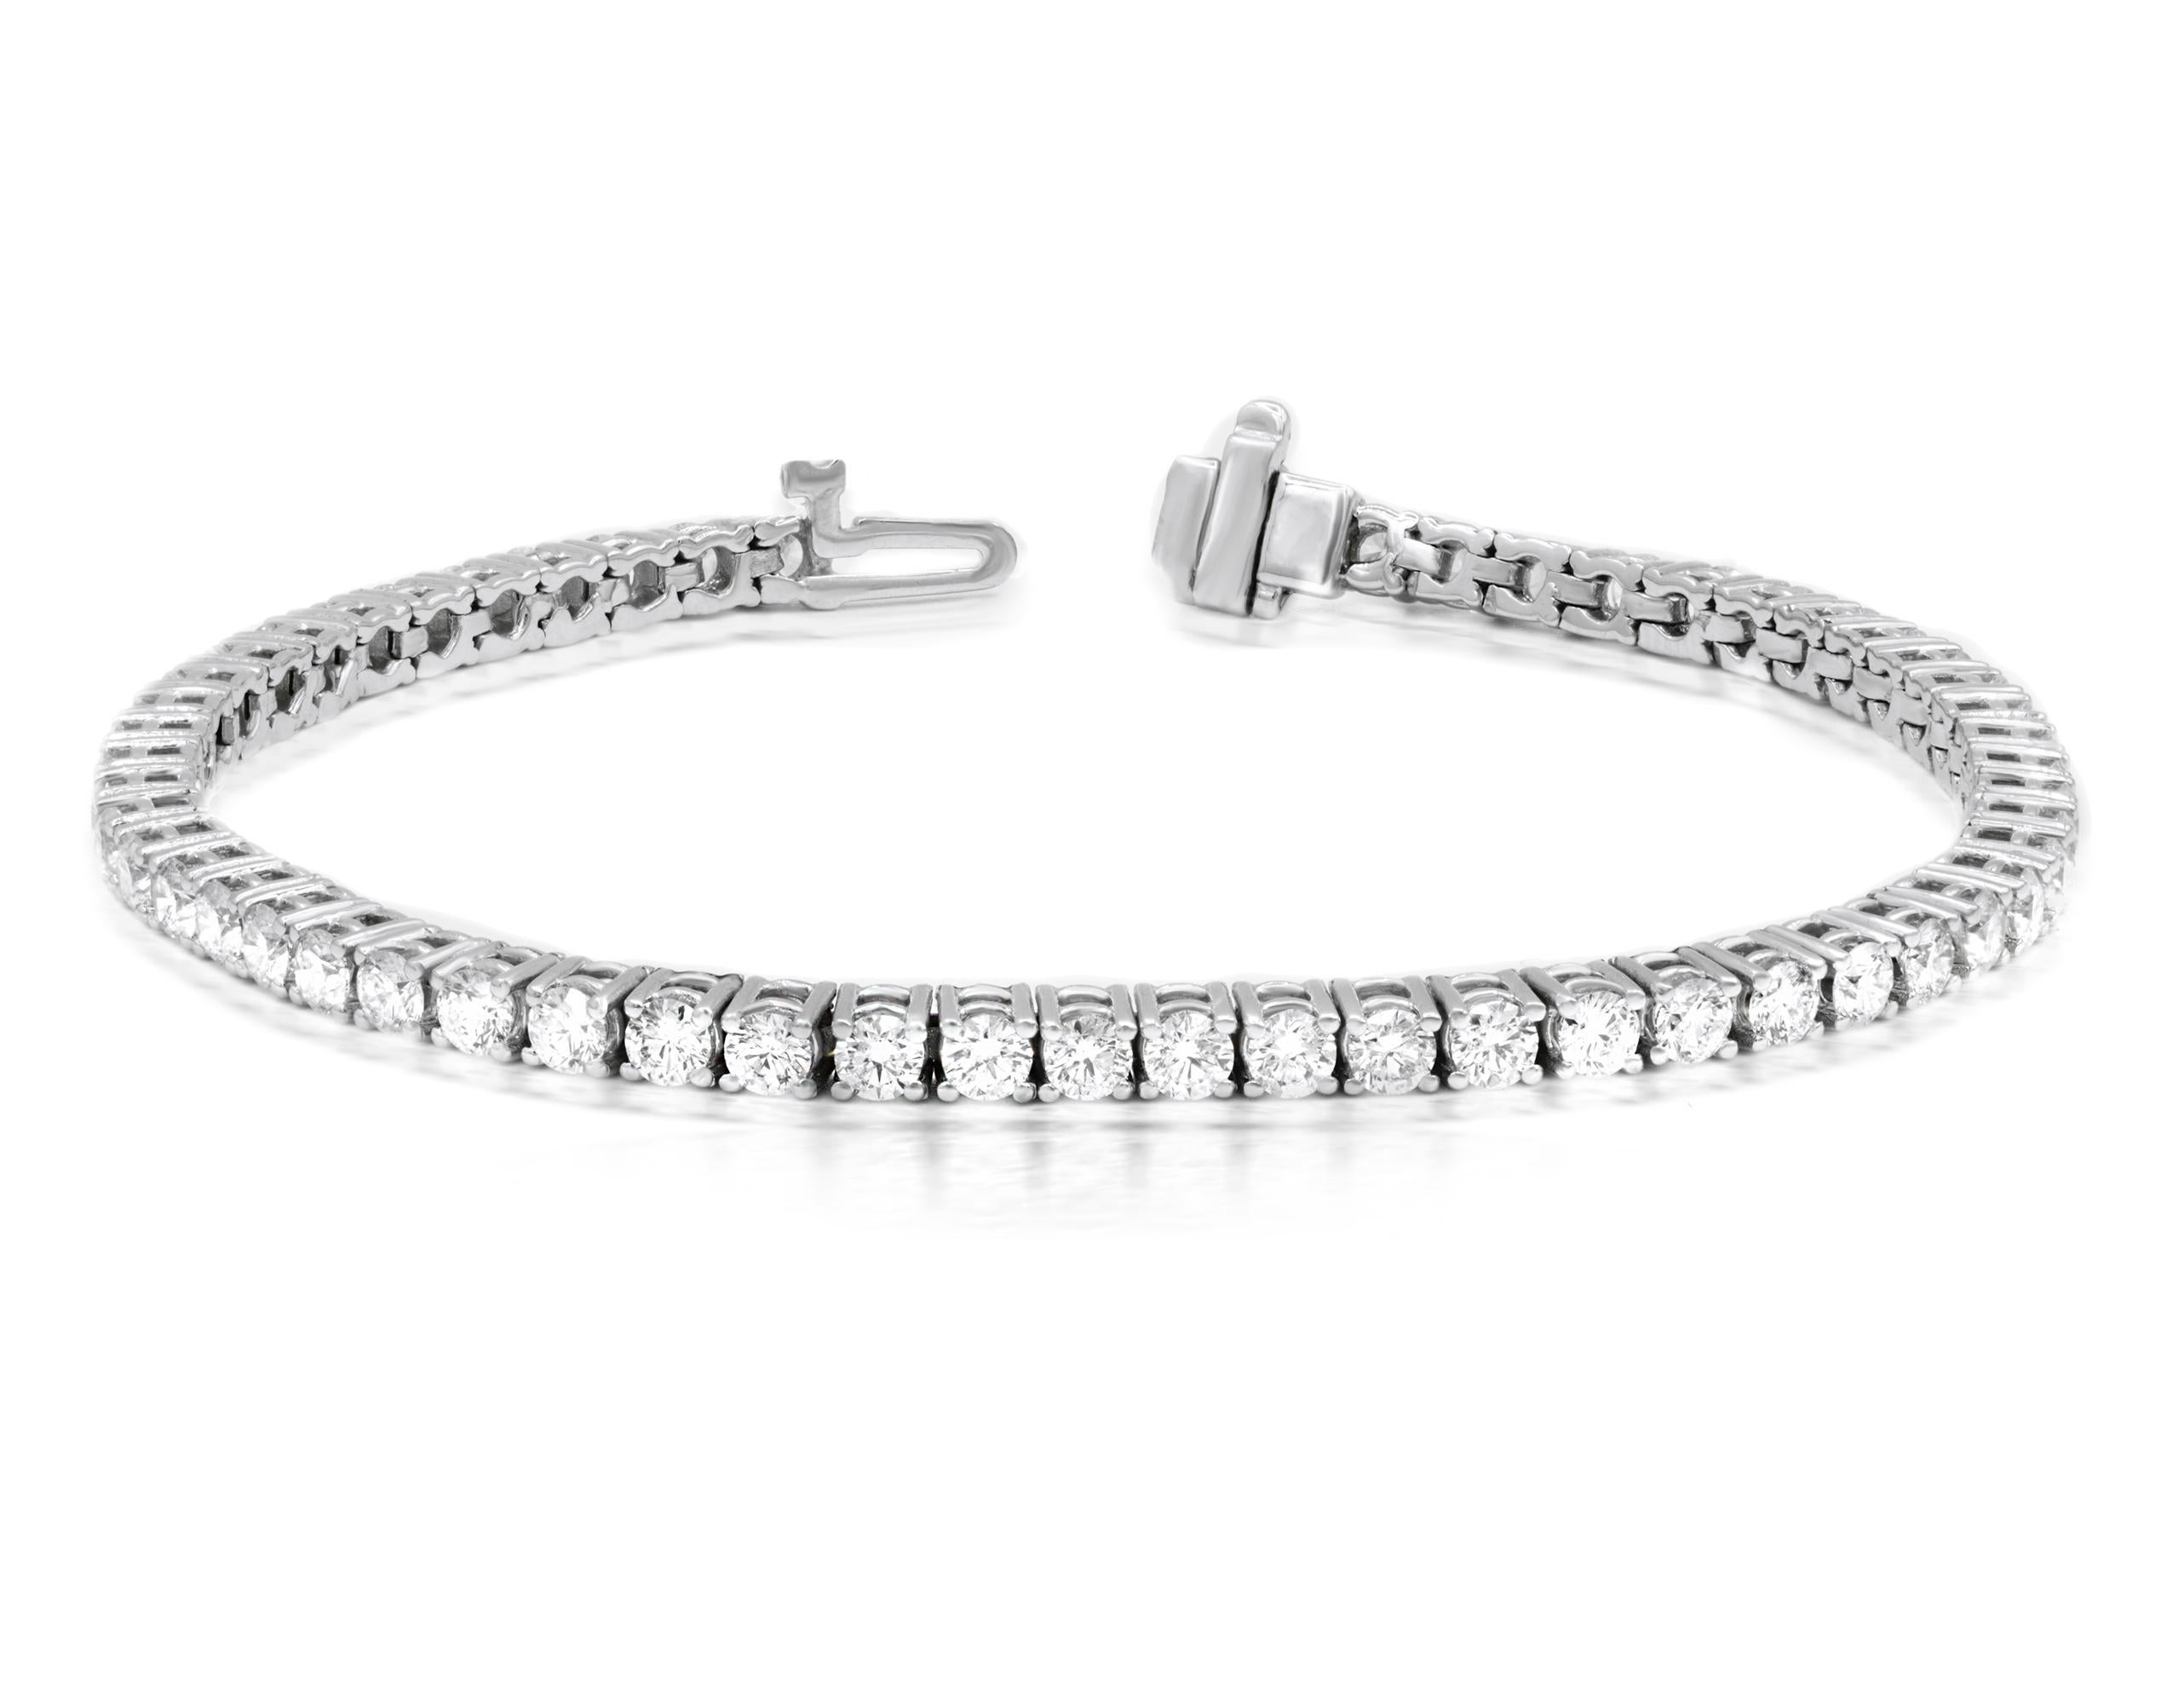 18kt white gold tennis bracelet featuring 7.00 cts tw of round diamonds in a 4 prong setting FG SI
Diana M. is a leading supplier of top-quality fine jewelry for over 35 years.
Diana M is one-stop shop for all your jewelry shopping, carrying line of